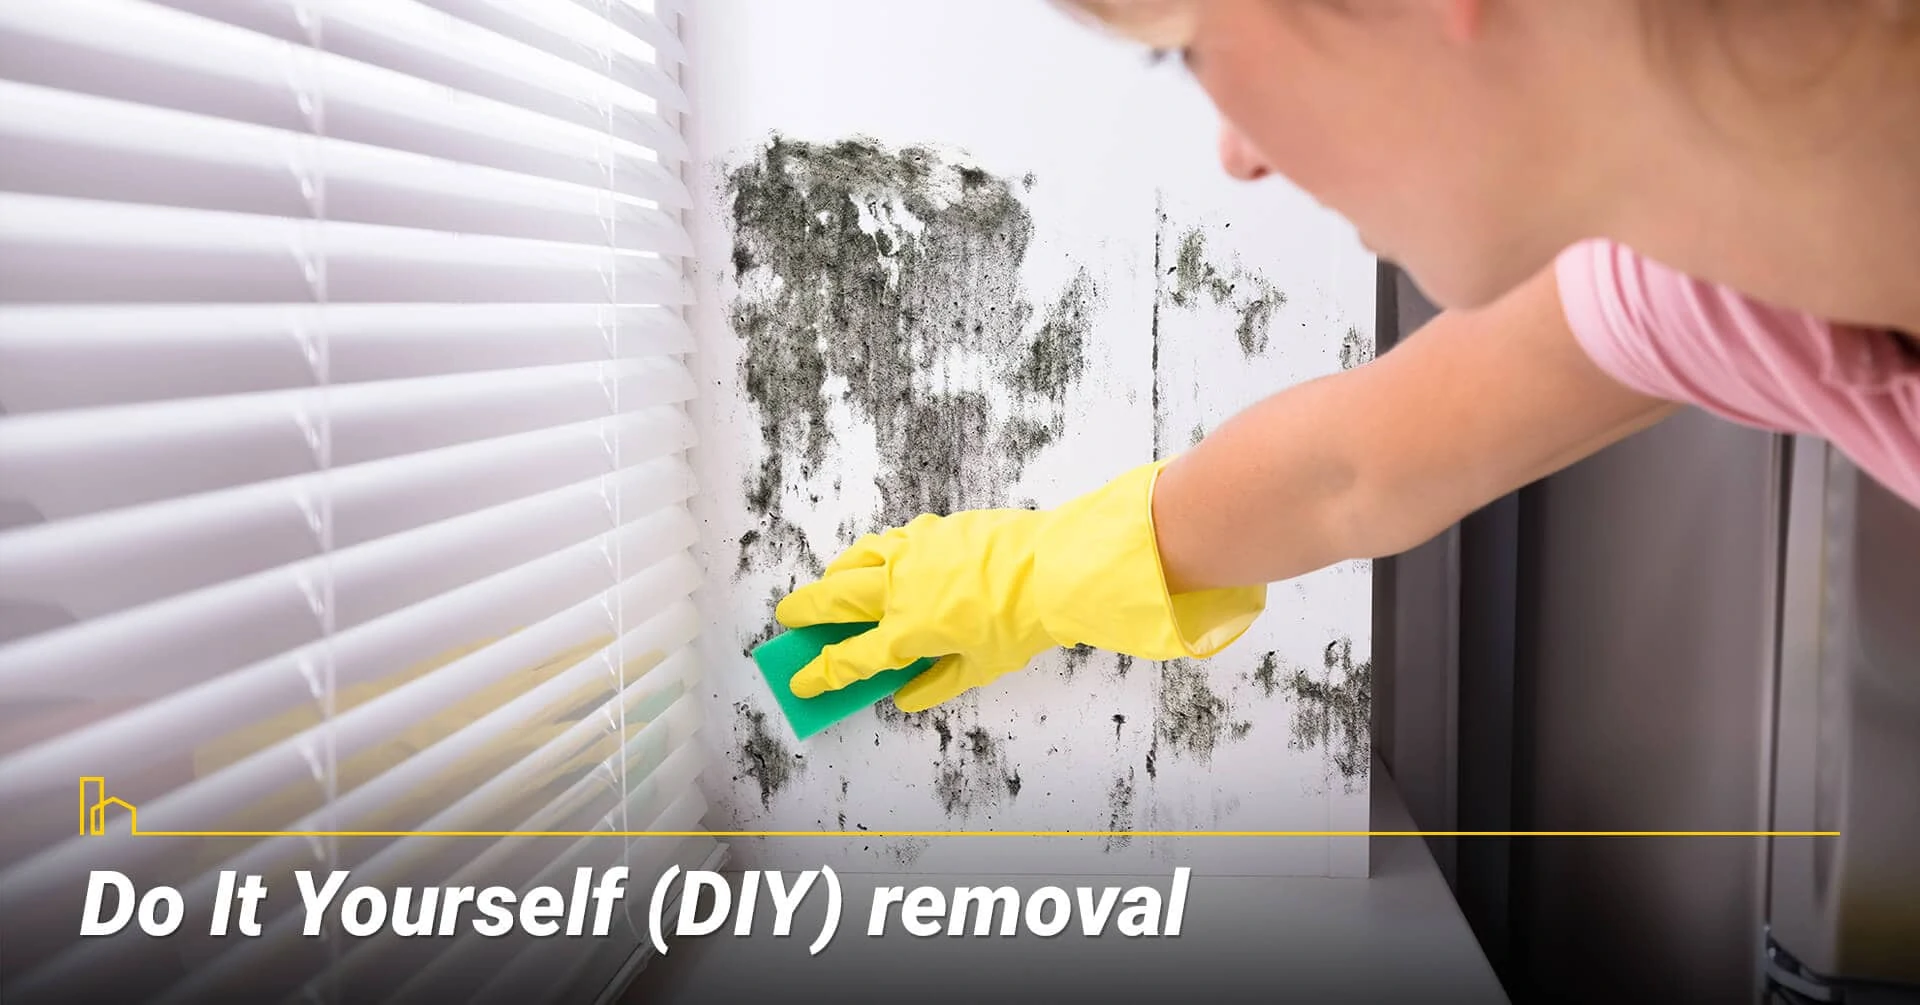 Do It Yourself (DIY) removal, remove mold yourself